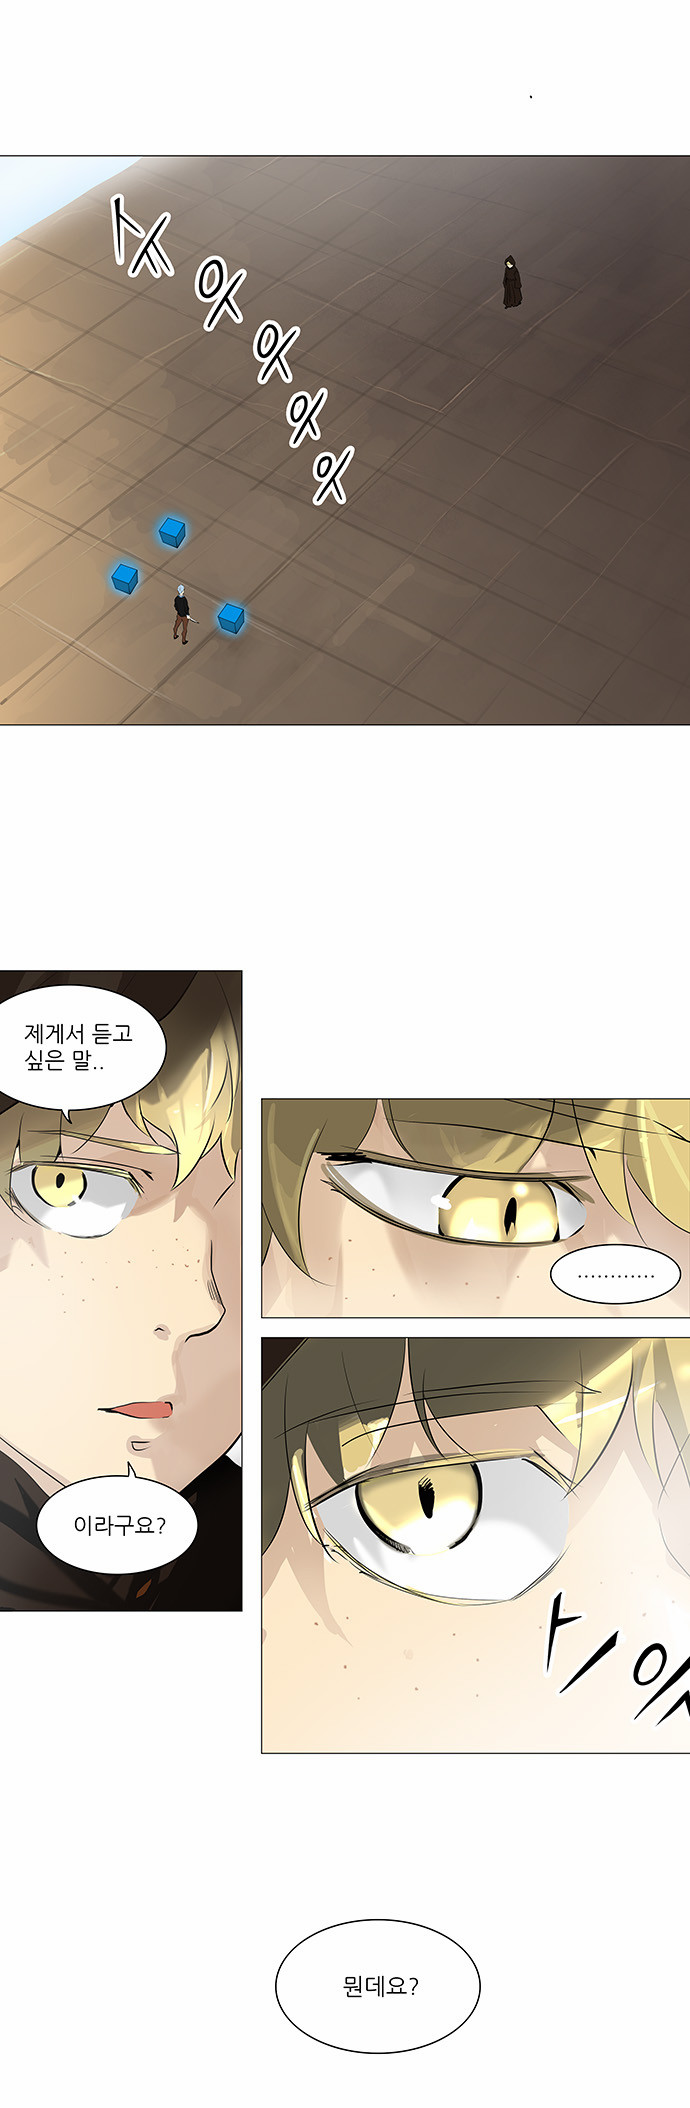 Tower of God - Chapter 226 - Page 1